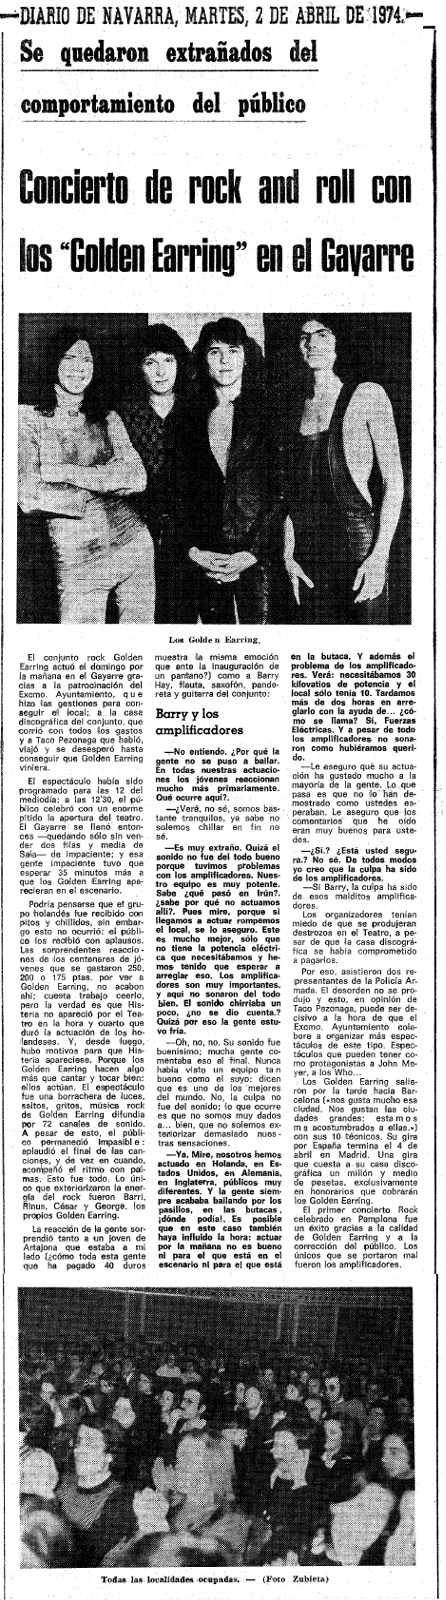 Golden Earring show review March 31 1974 Pamplona(Spain) - Teatro Gayarre